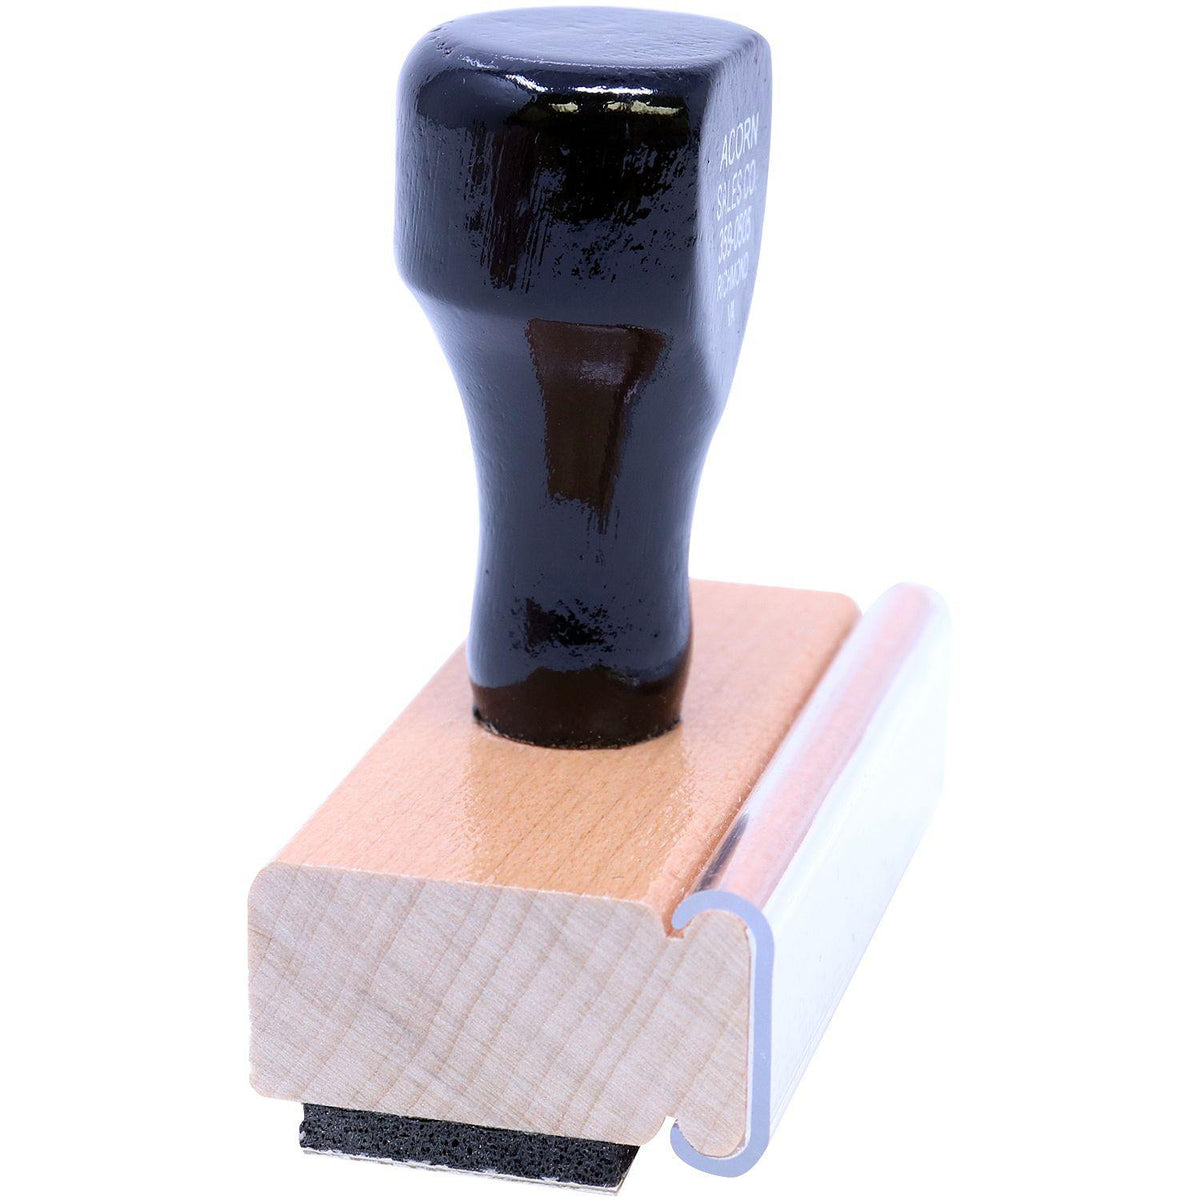 Side View of Large Read Route Rubber Stamp at an Angle